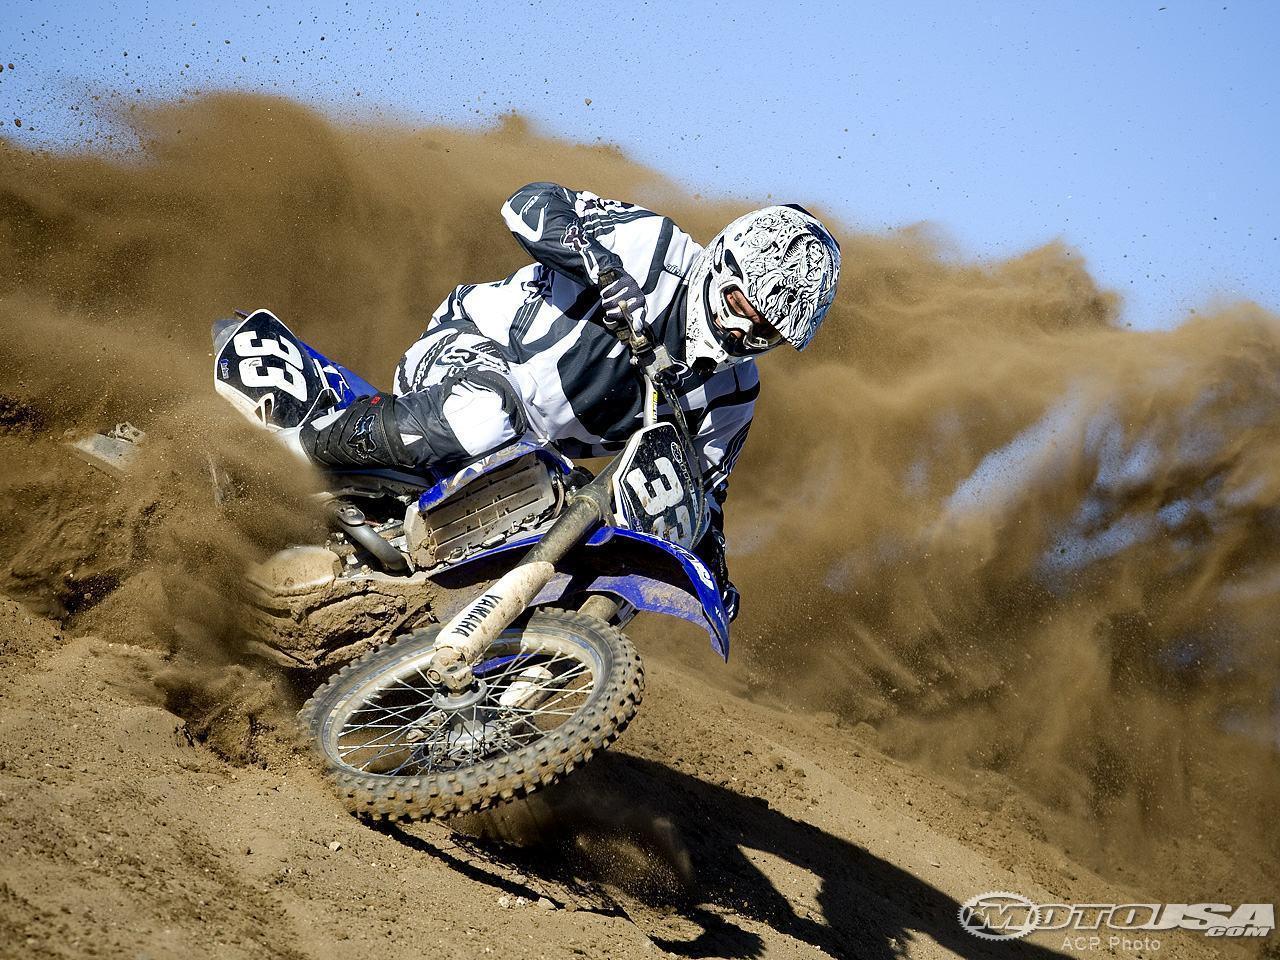 Cool Dirt Bike Background Image & Picture